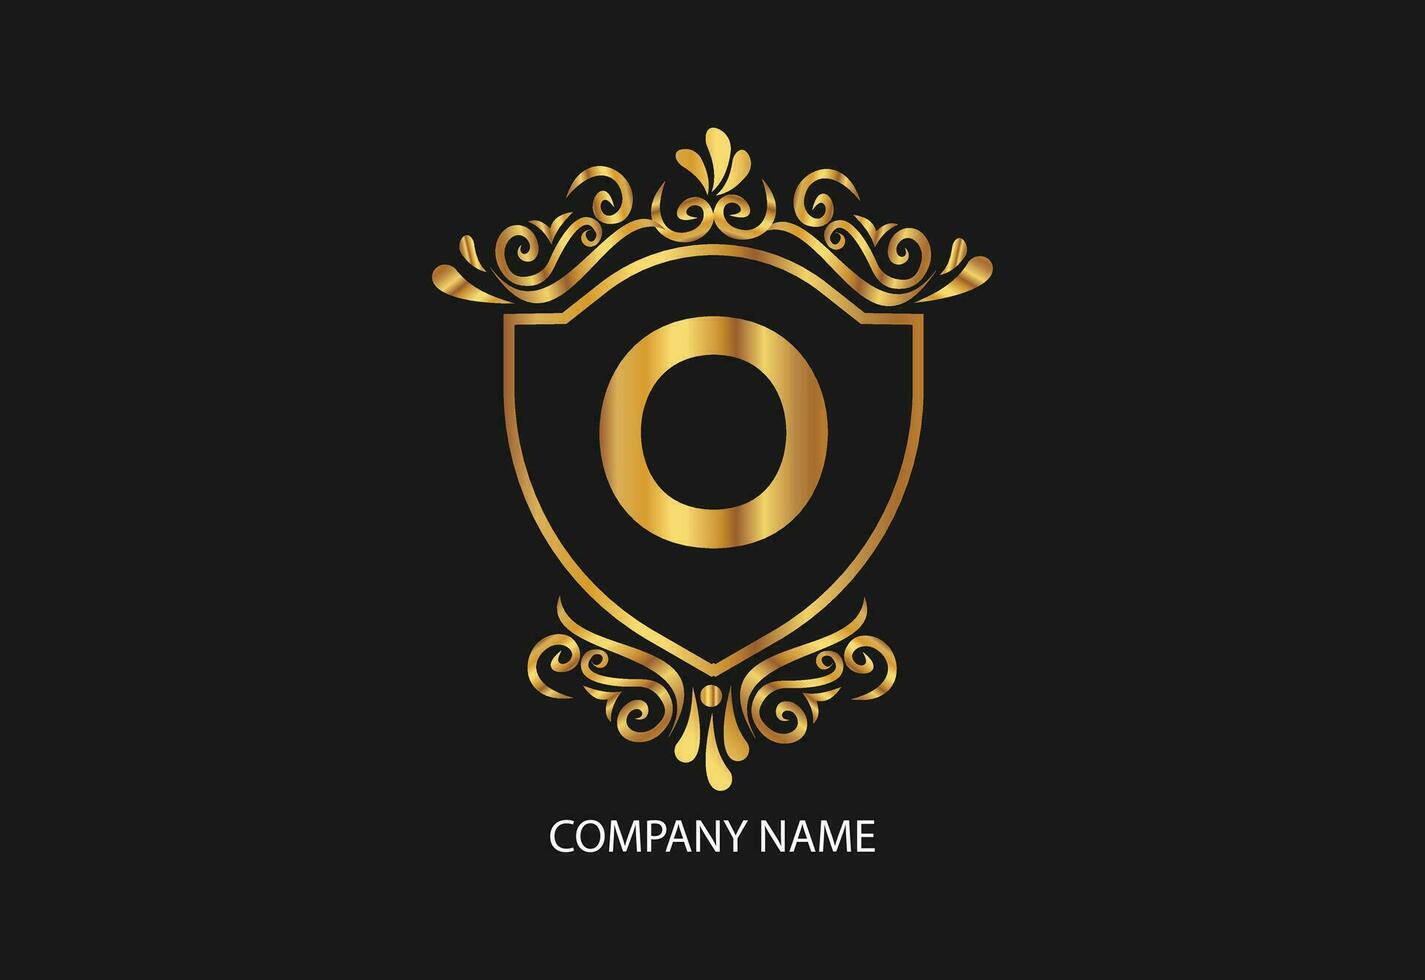 latter O natural and organic logo modern design. Natural logo for branding, corporate identity and business card vector